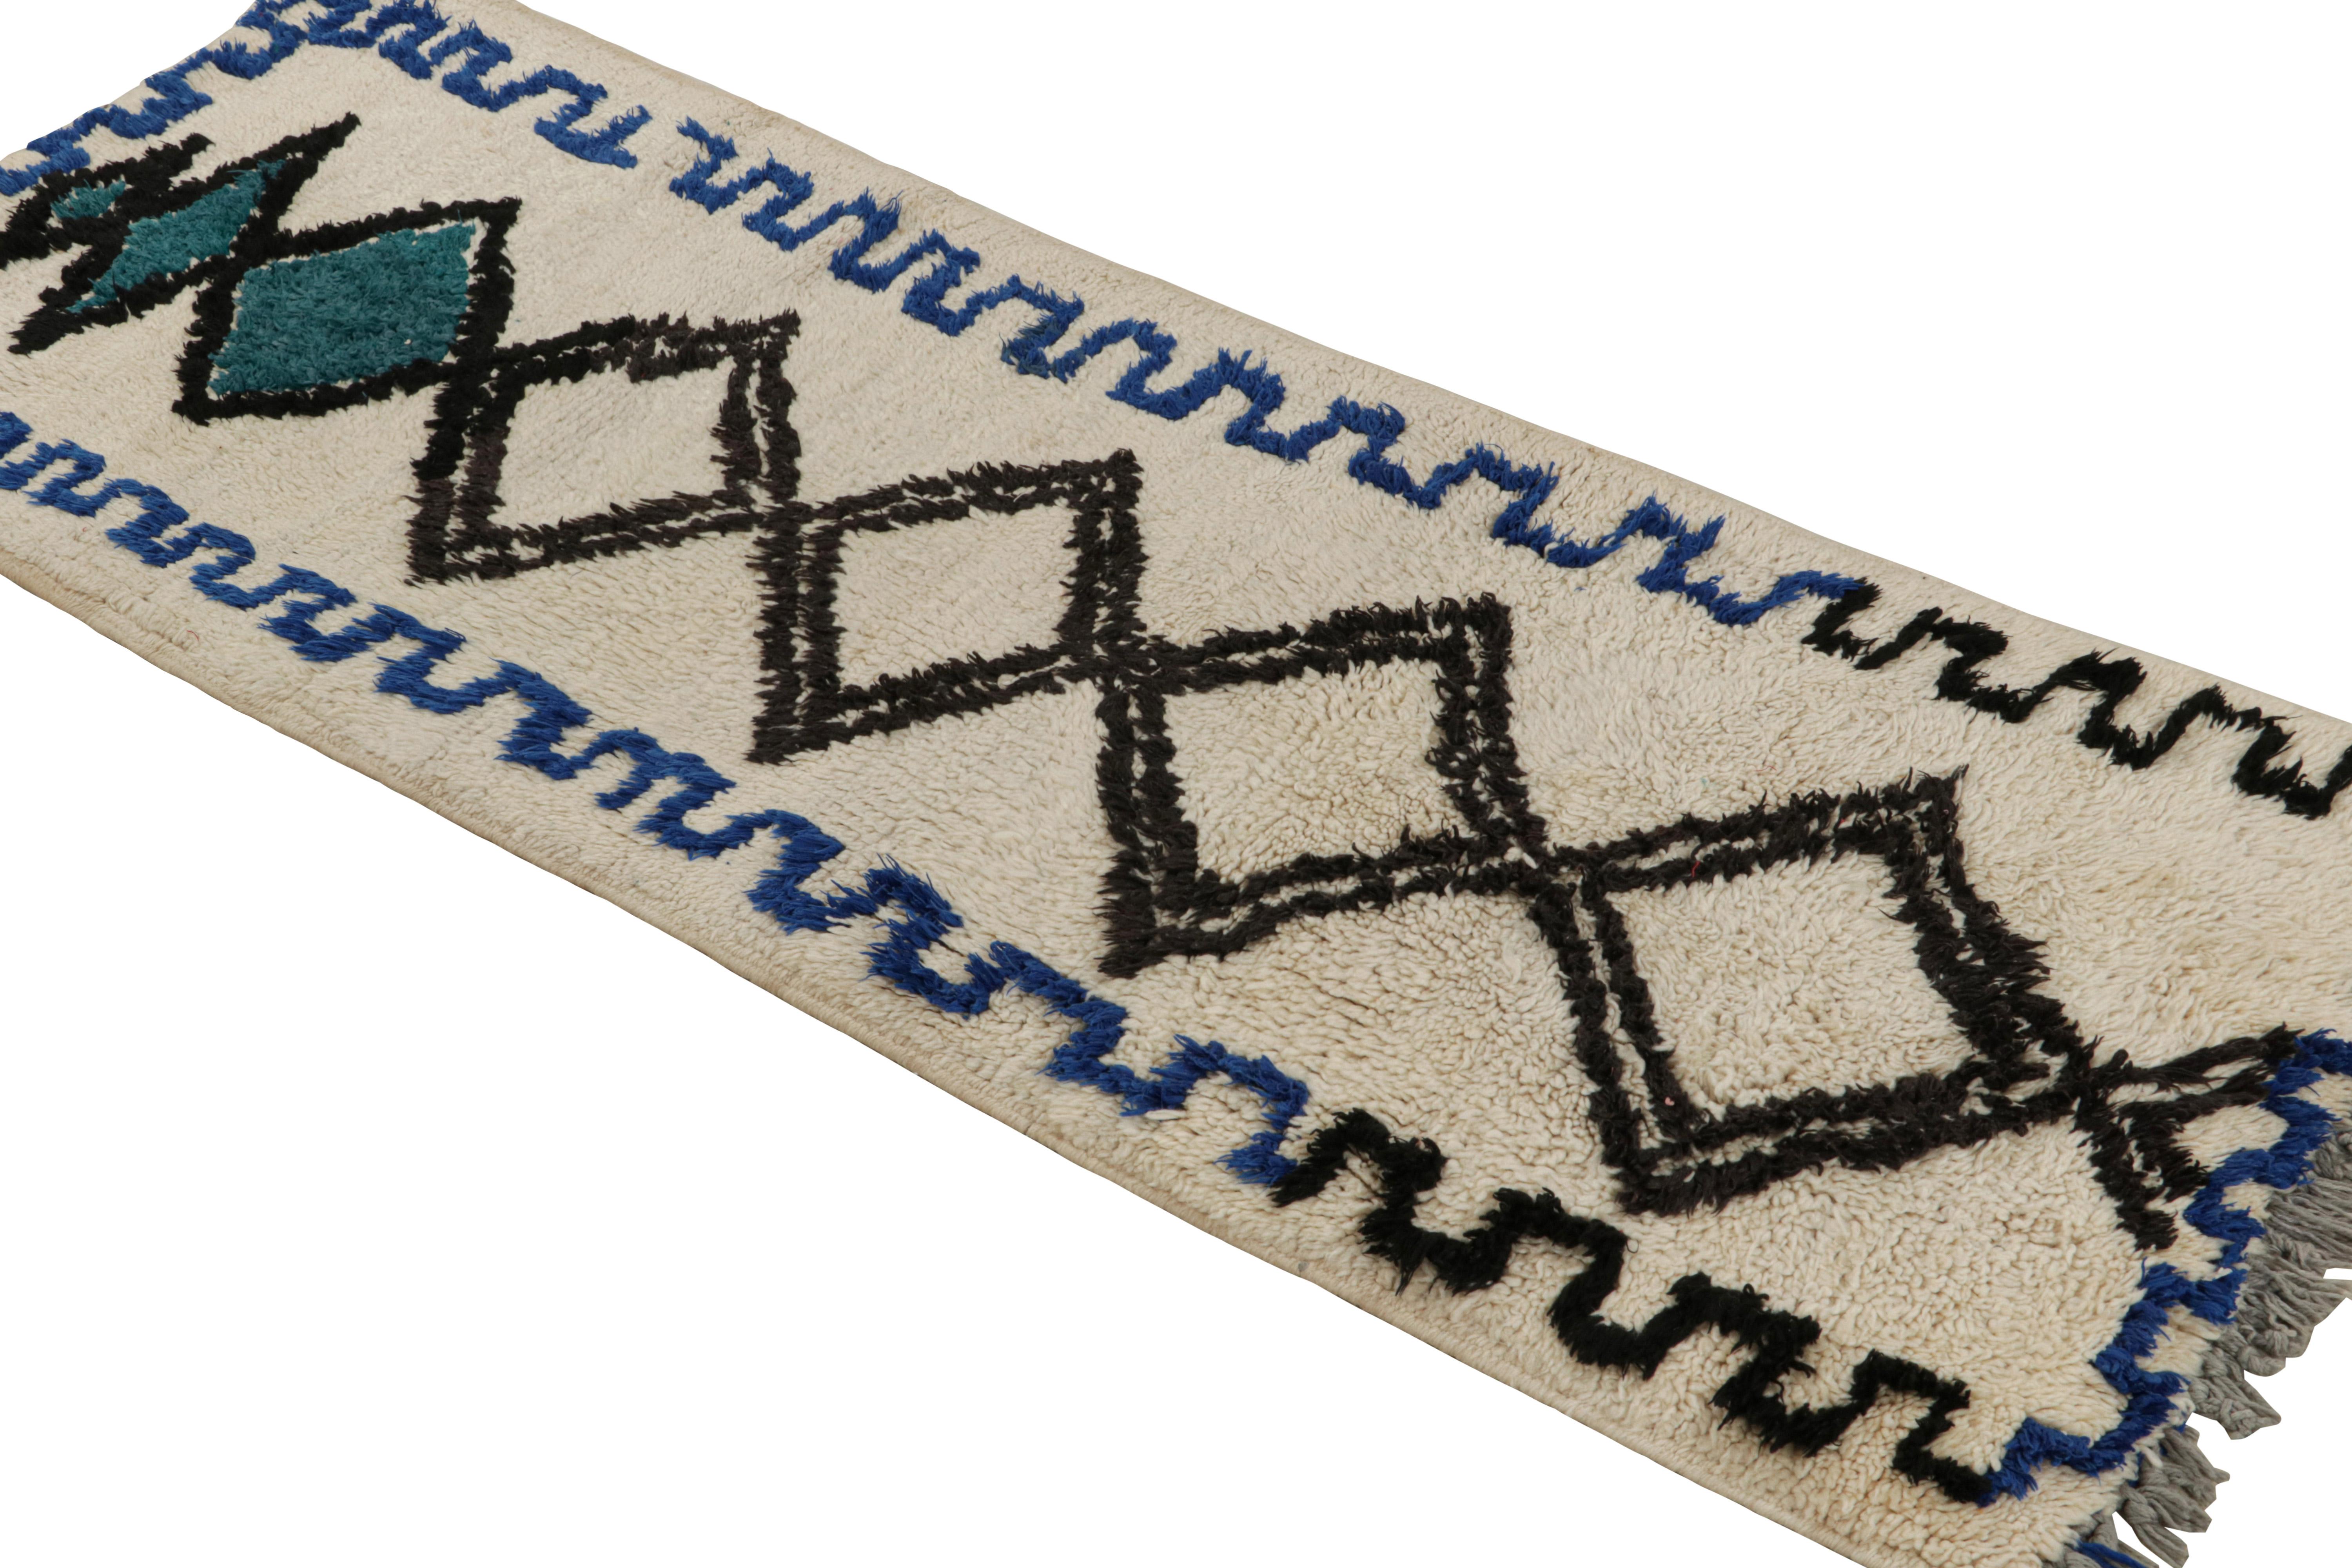 Hand-knotted in wool circa 1950-1960, this vintage 2x6 Moroccan rug is believed to hail from the Azilal tribe. 

On the Design: 

This rug enjoys blue-black patterns on a white background. Keen eyes will further admire its healthy pile—exemplary of